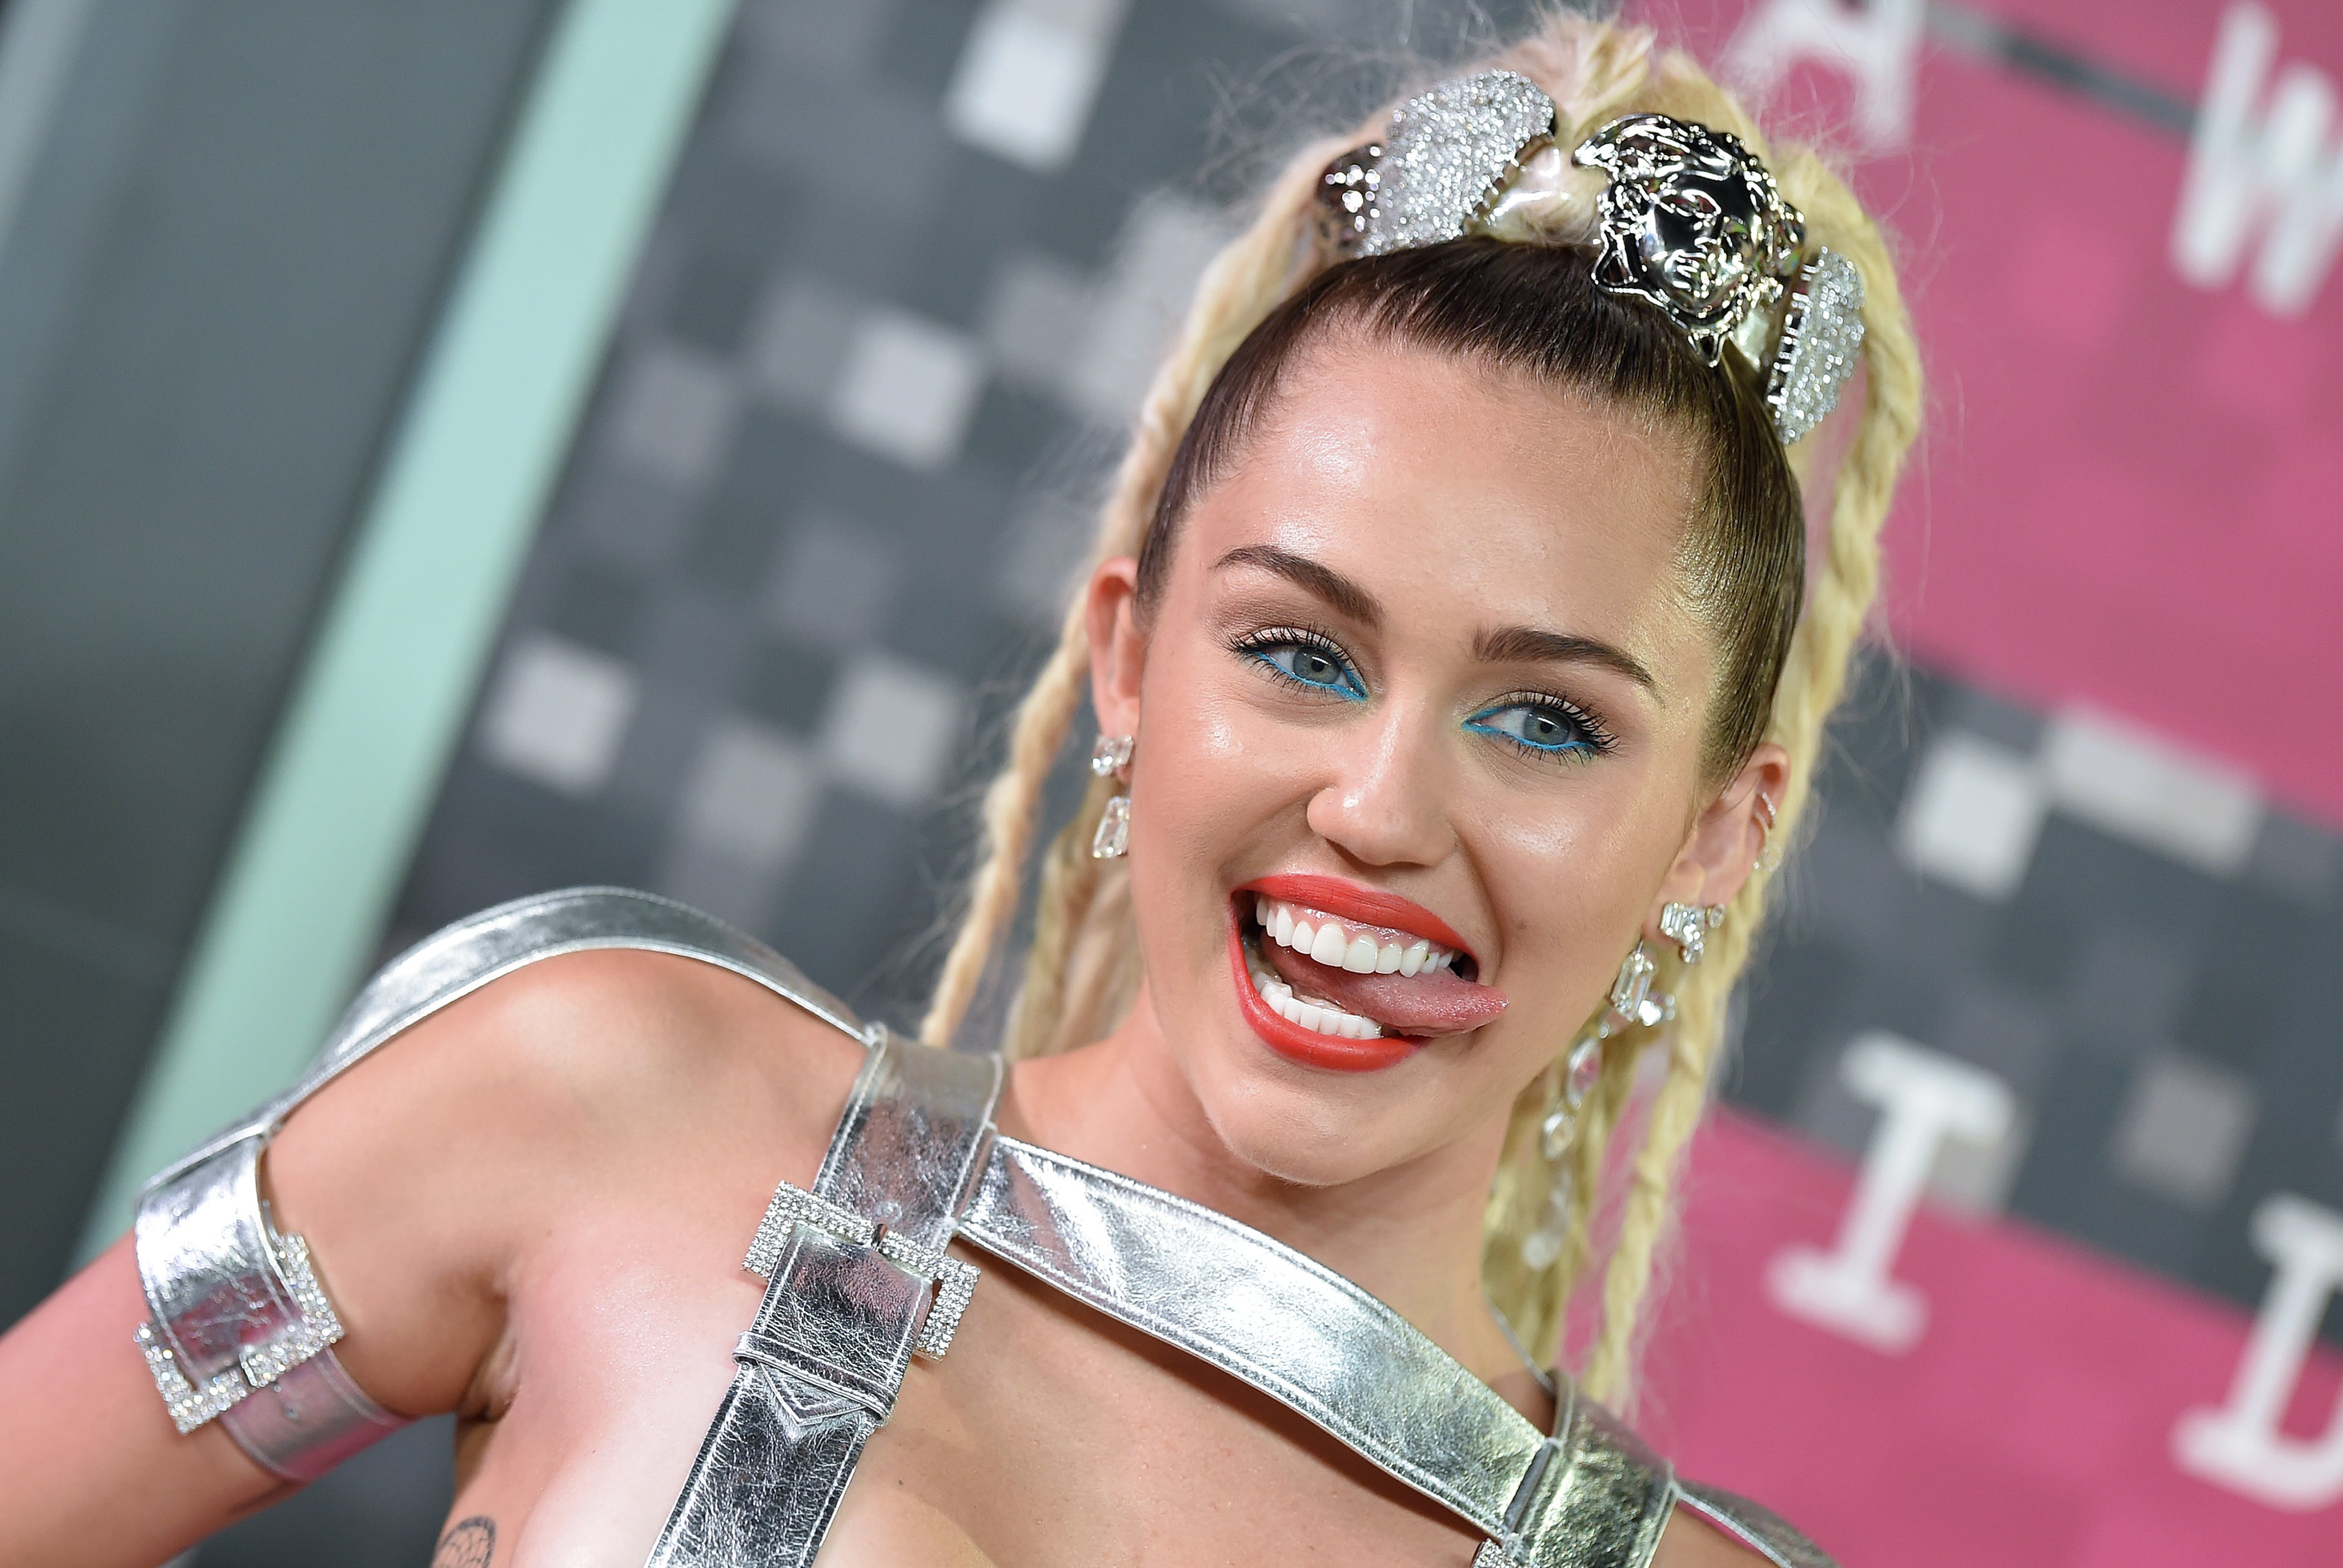 If You've Loved Miley Cyrus' Looks In 2019, Make Them Your